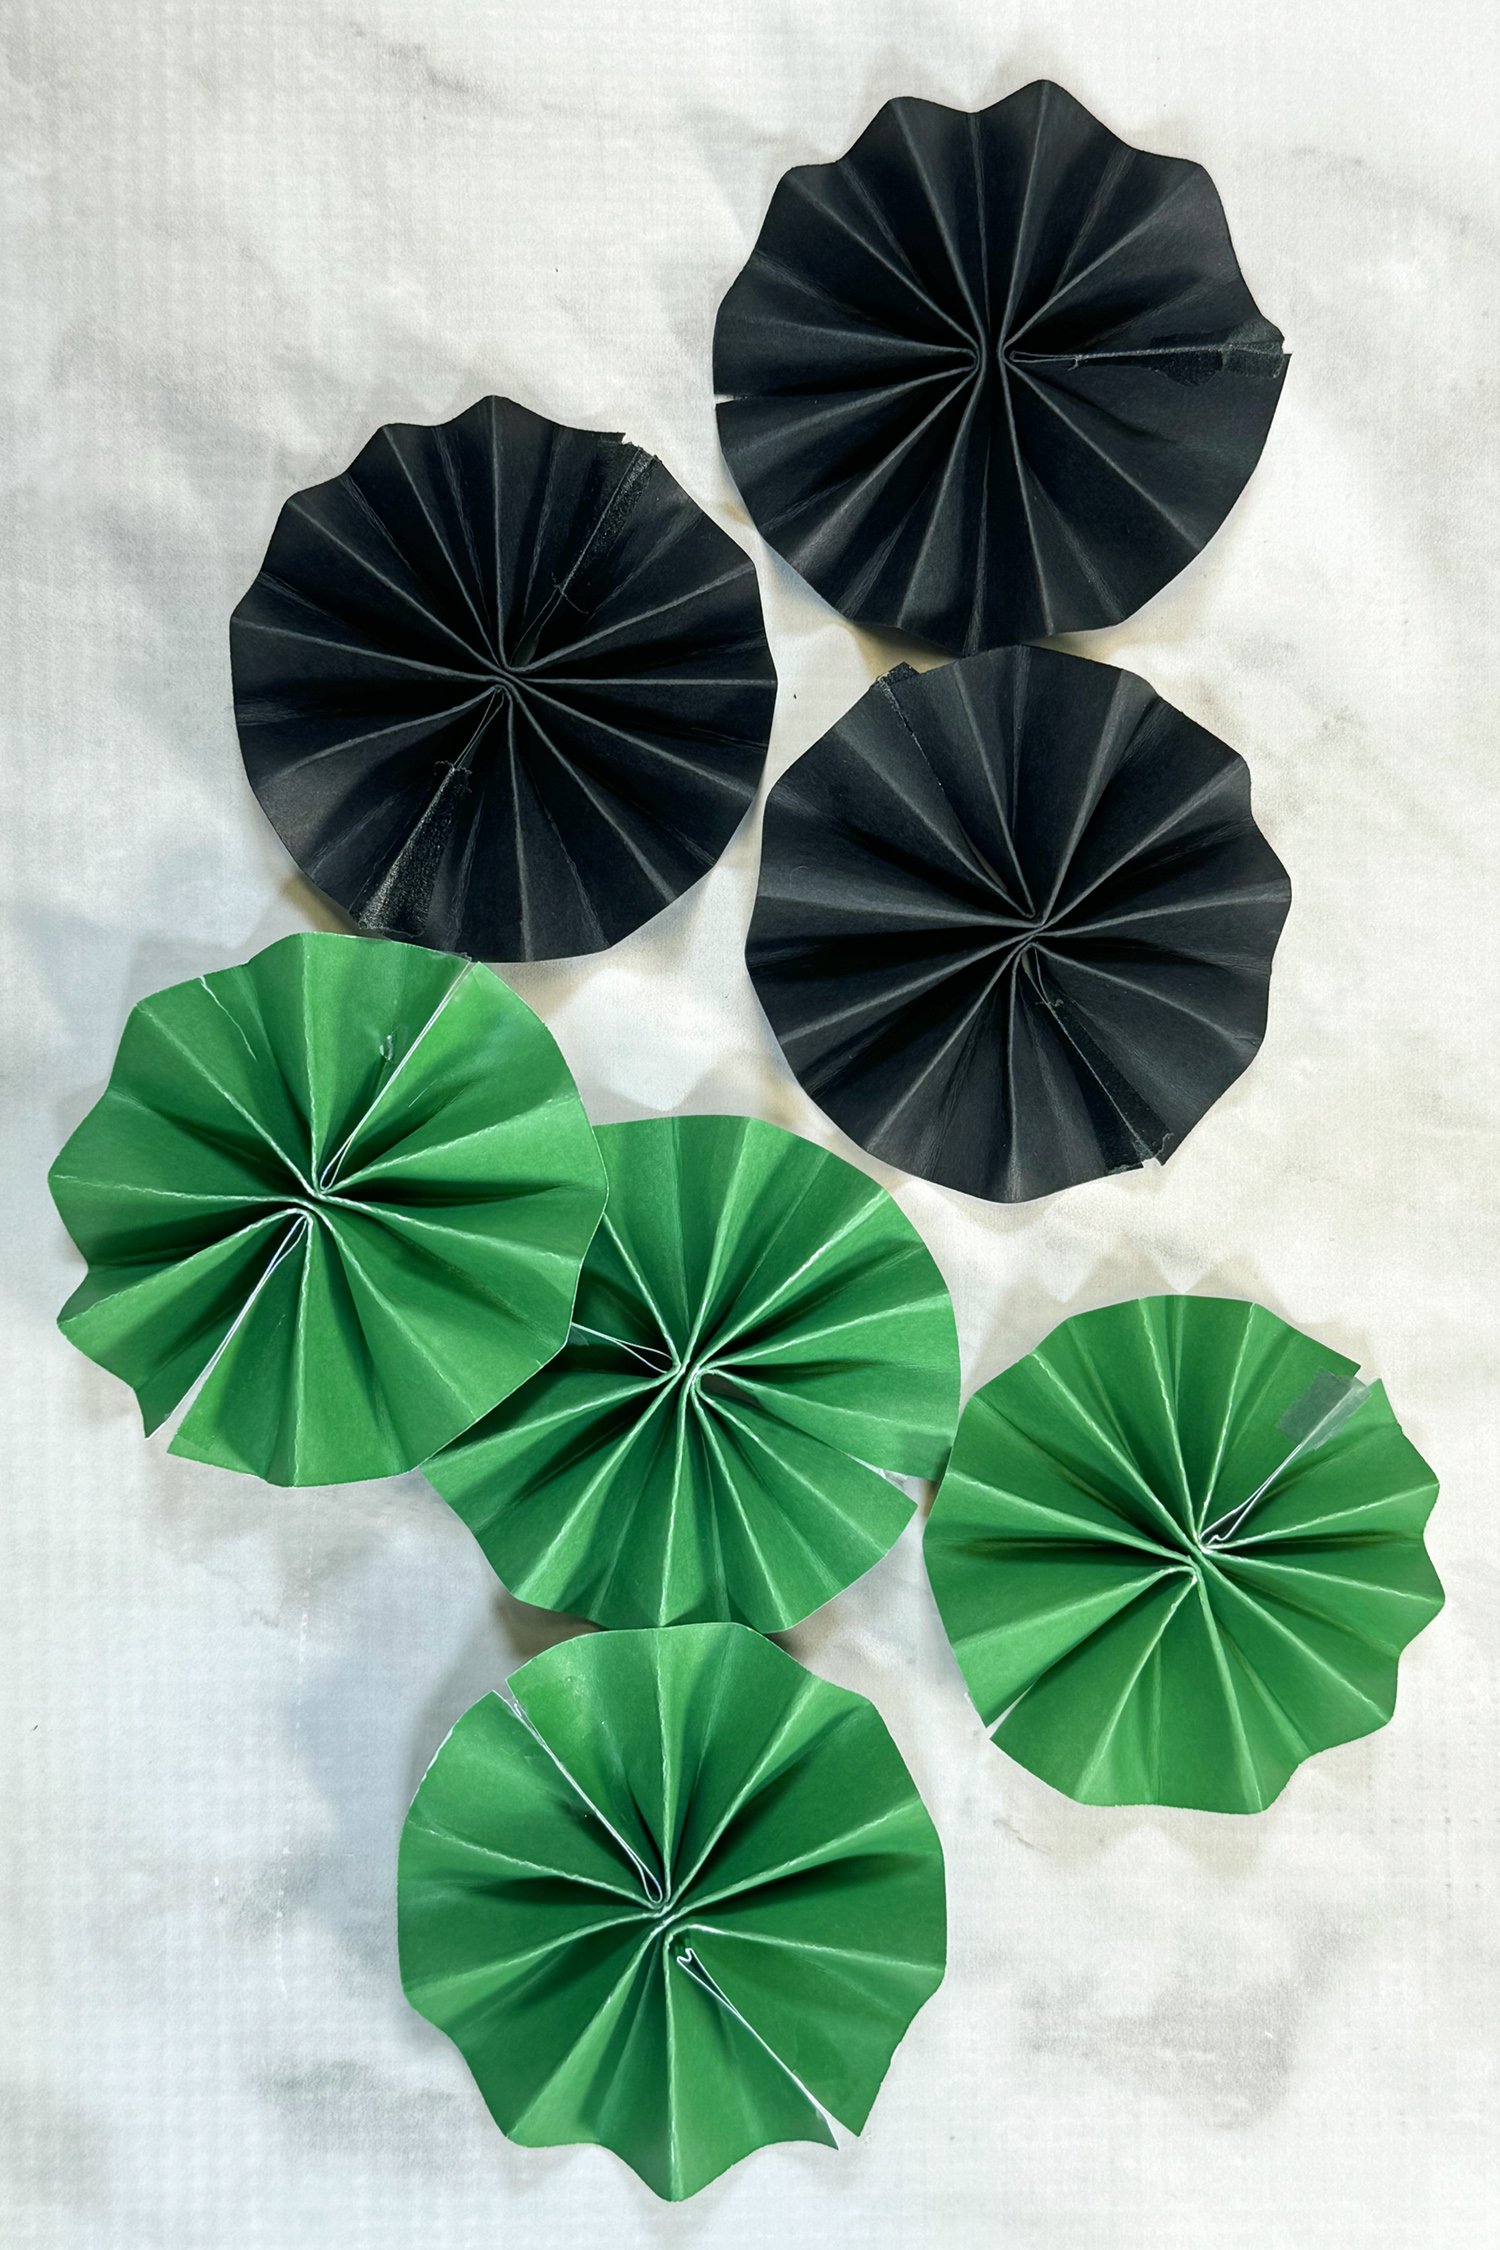 green and black paper rosettes on a grey marble background